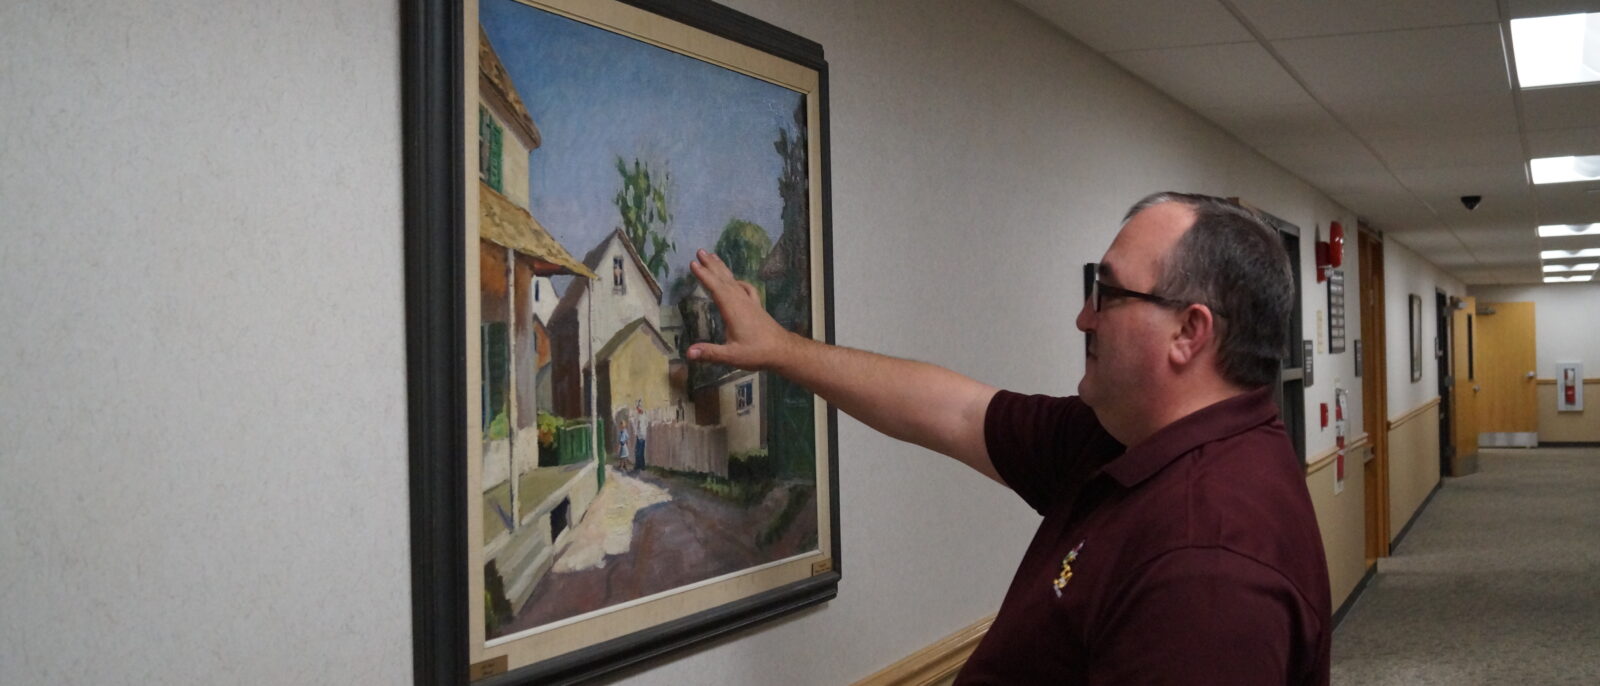 A man in a maroon LCCC polo shirt holds his hand up to the front of a painting in a hallway.